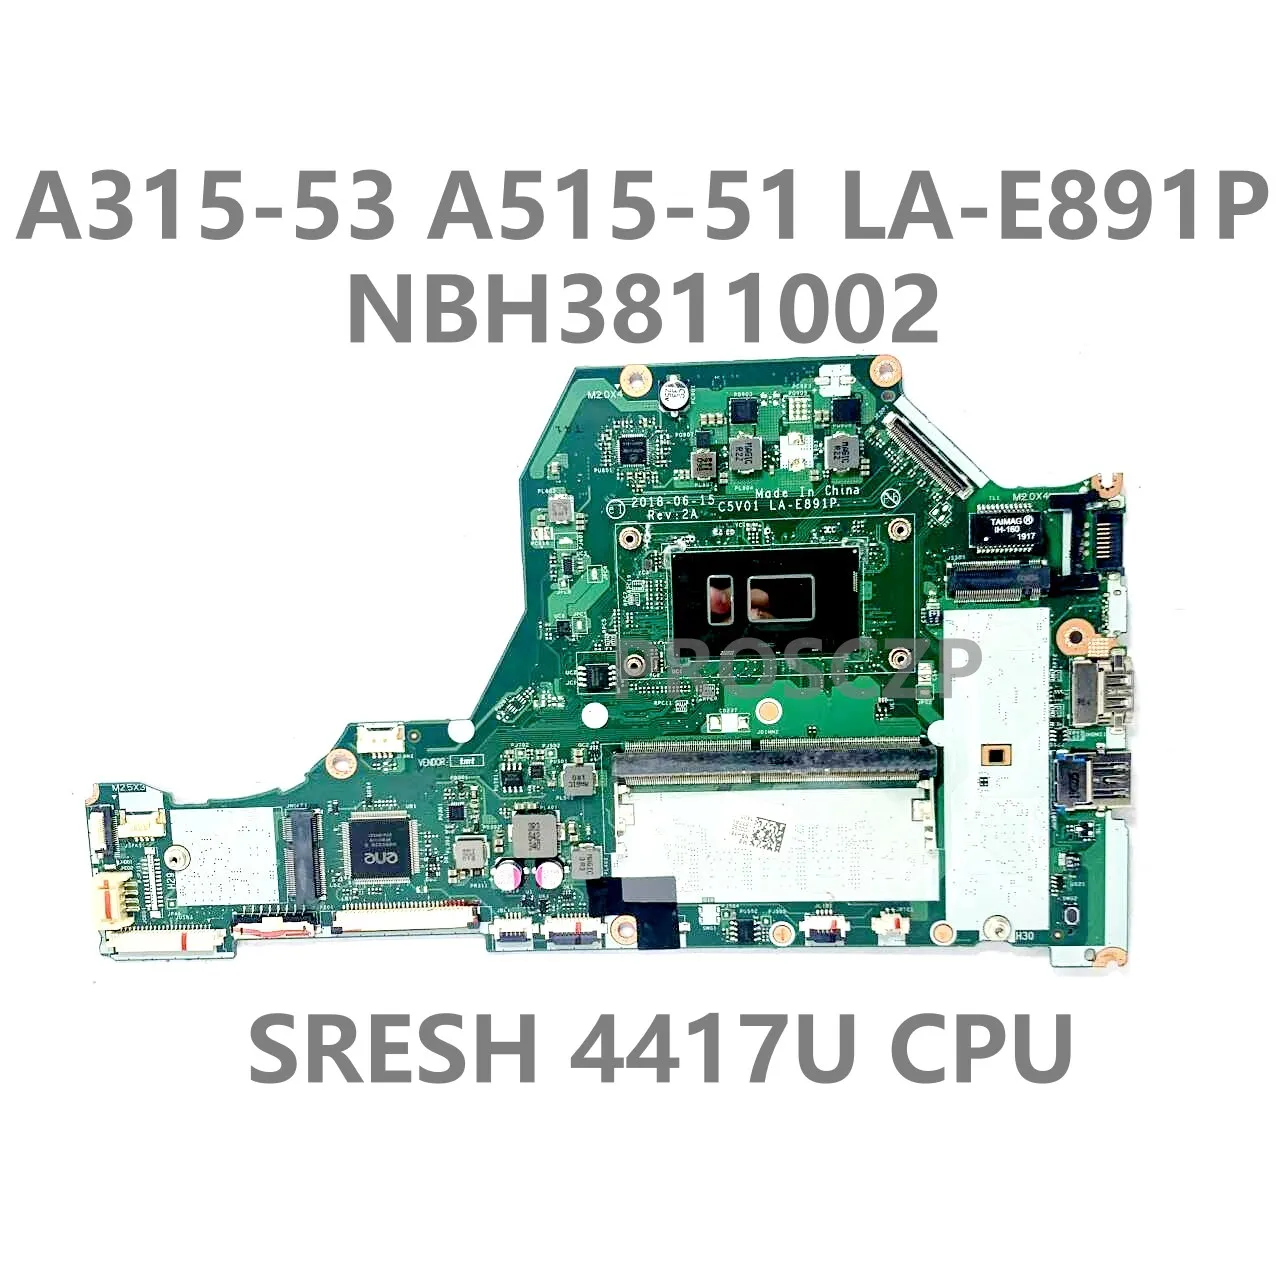 

For Acer Aspire A315-53 A515-51 Laptop Motherboard C5V01 LA-E891P Mainboard NBH3811002 With SRESH 4417U CPU 100% Full Working OK